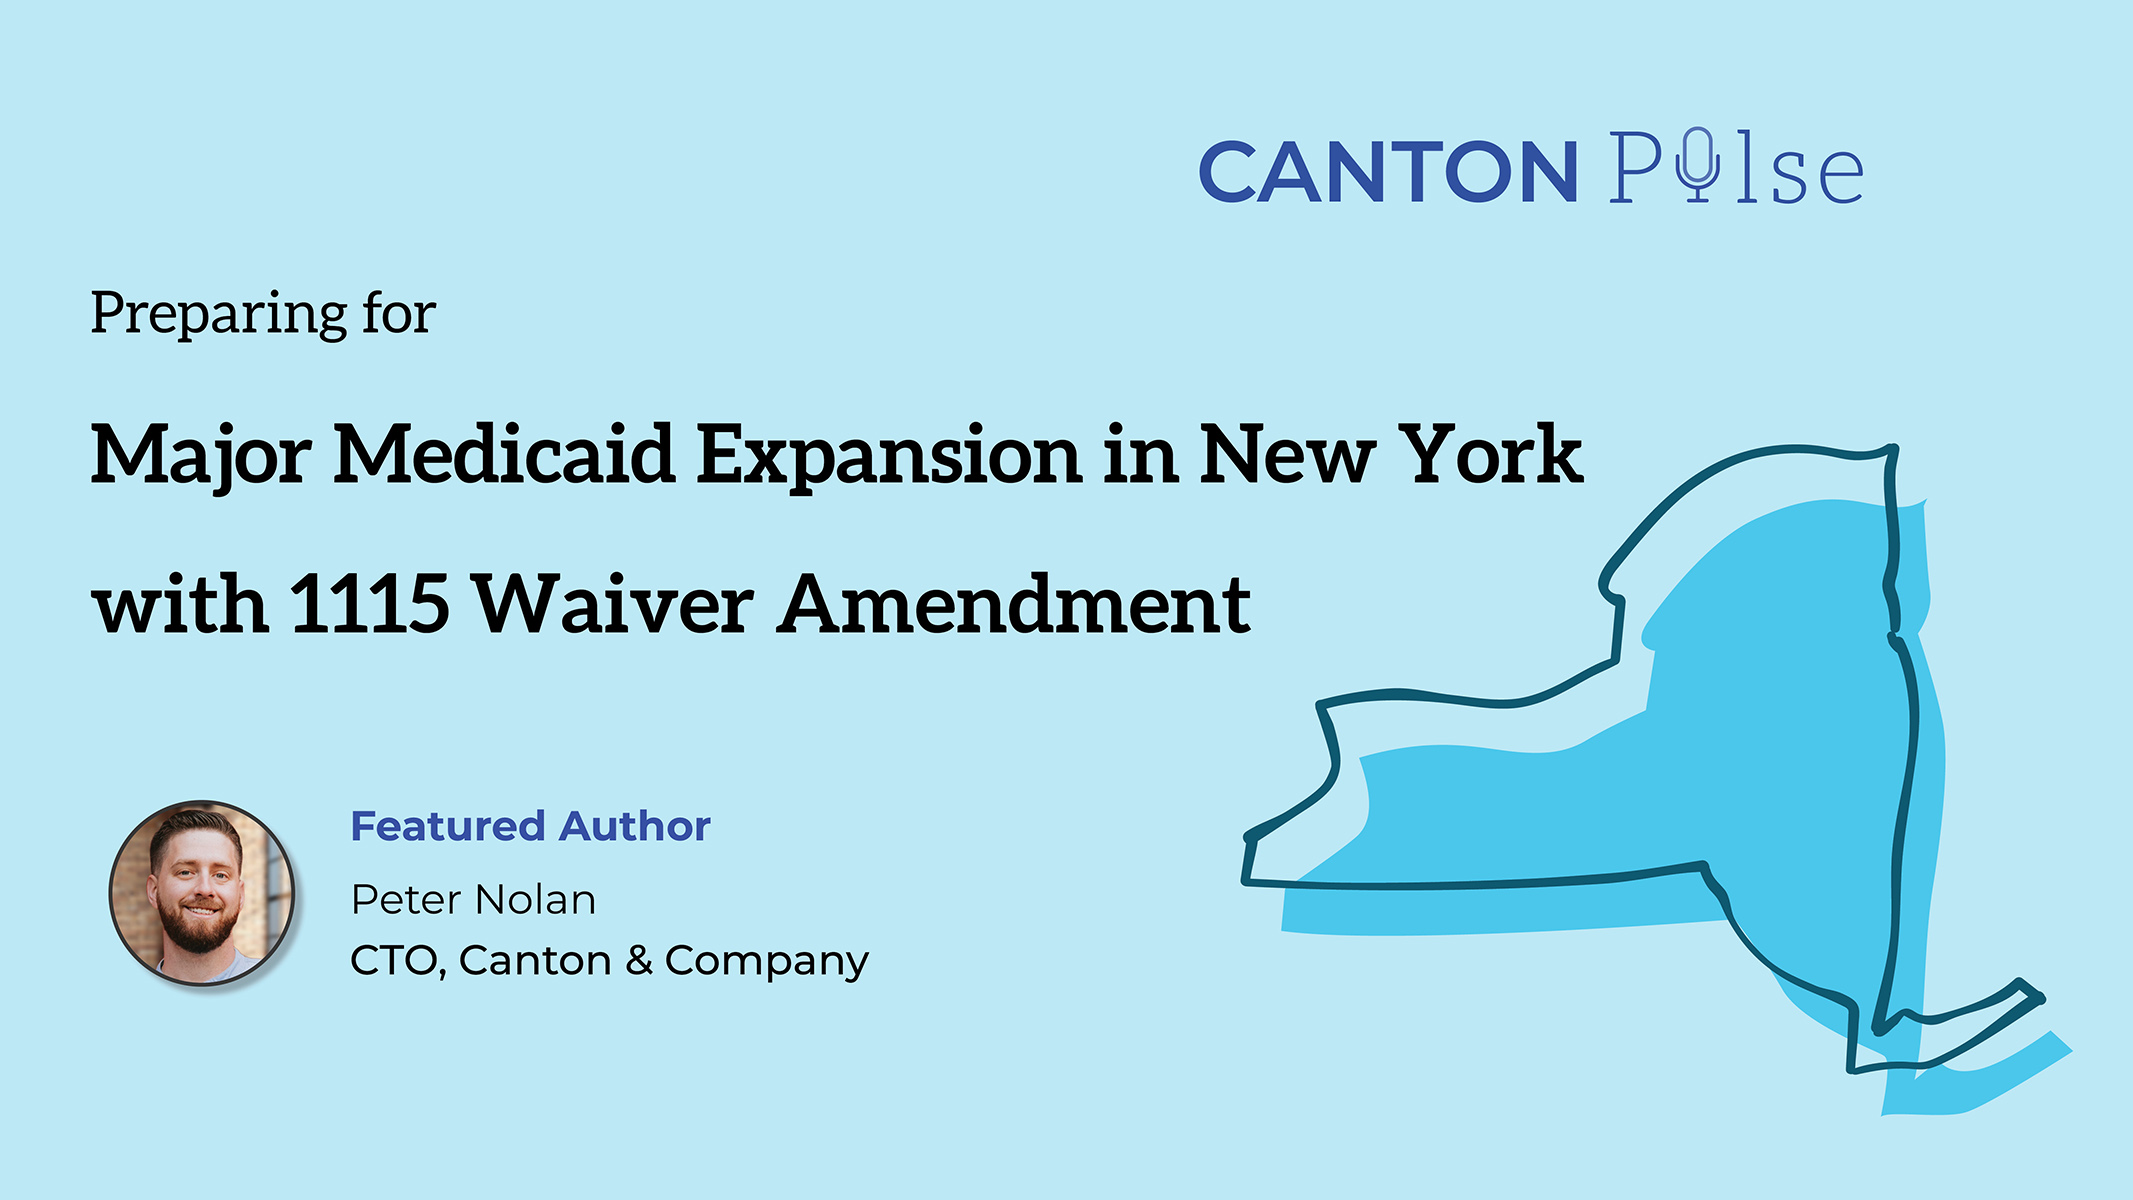 Preparing for Major Medicaid Expansion in New York with 1115 Waiver Amendment Canton & Company